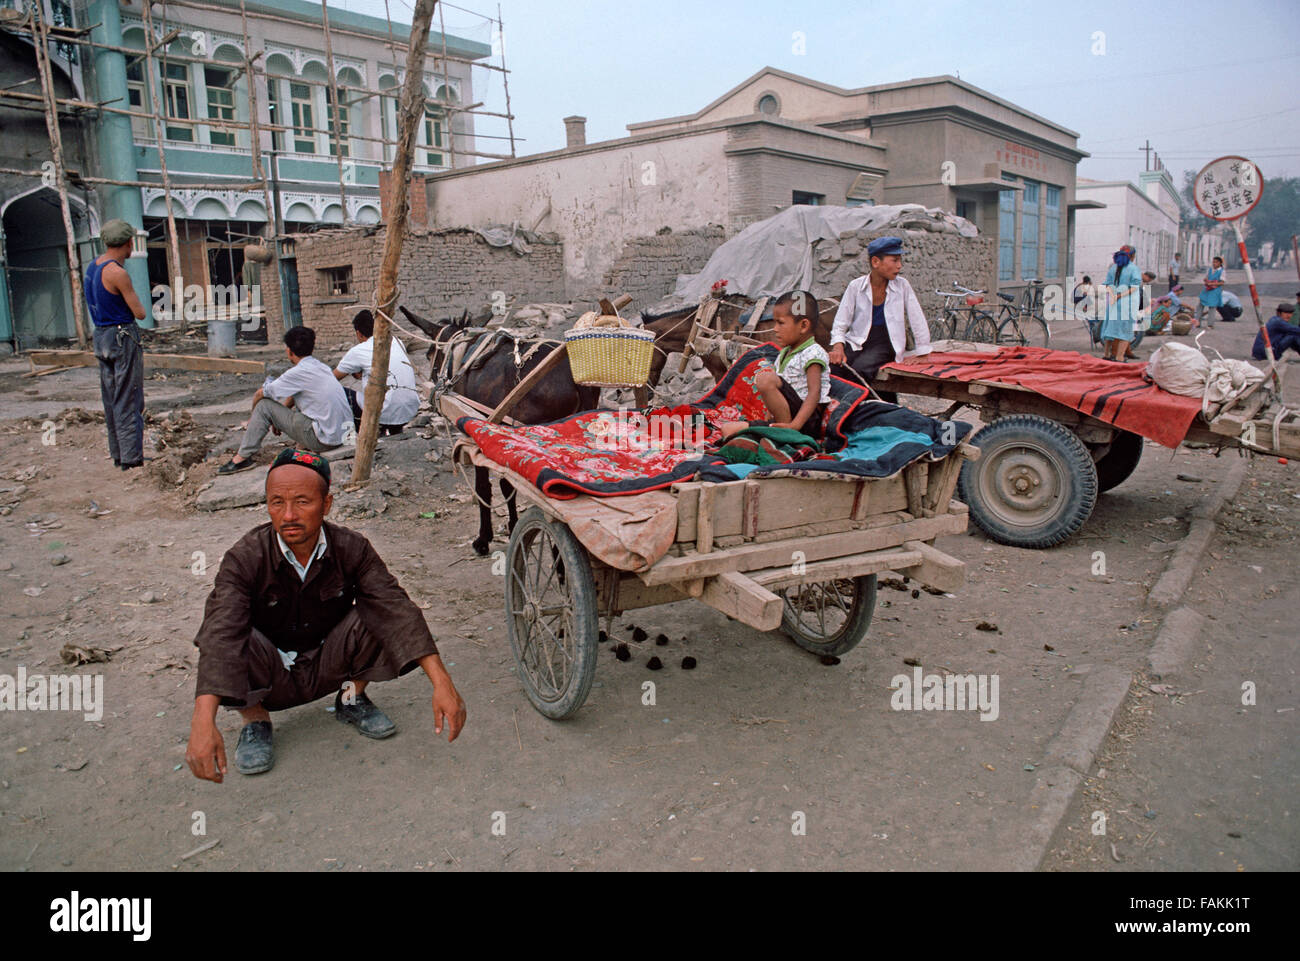 Uyghur man with cart and donkey in Turpan, Xinjiang Province, China Stock Photo